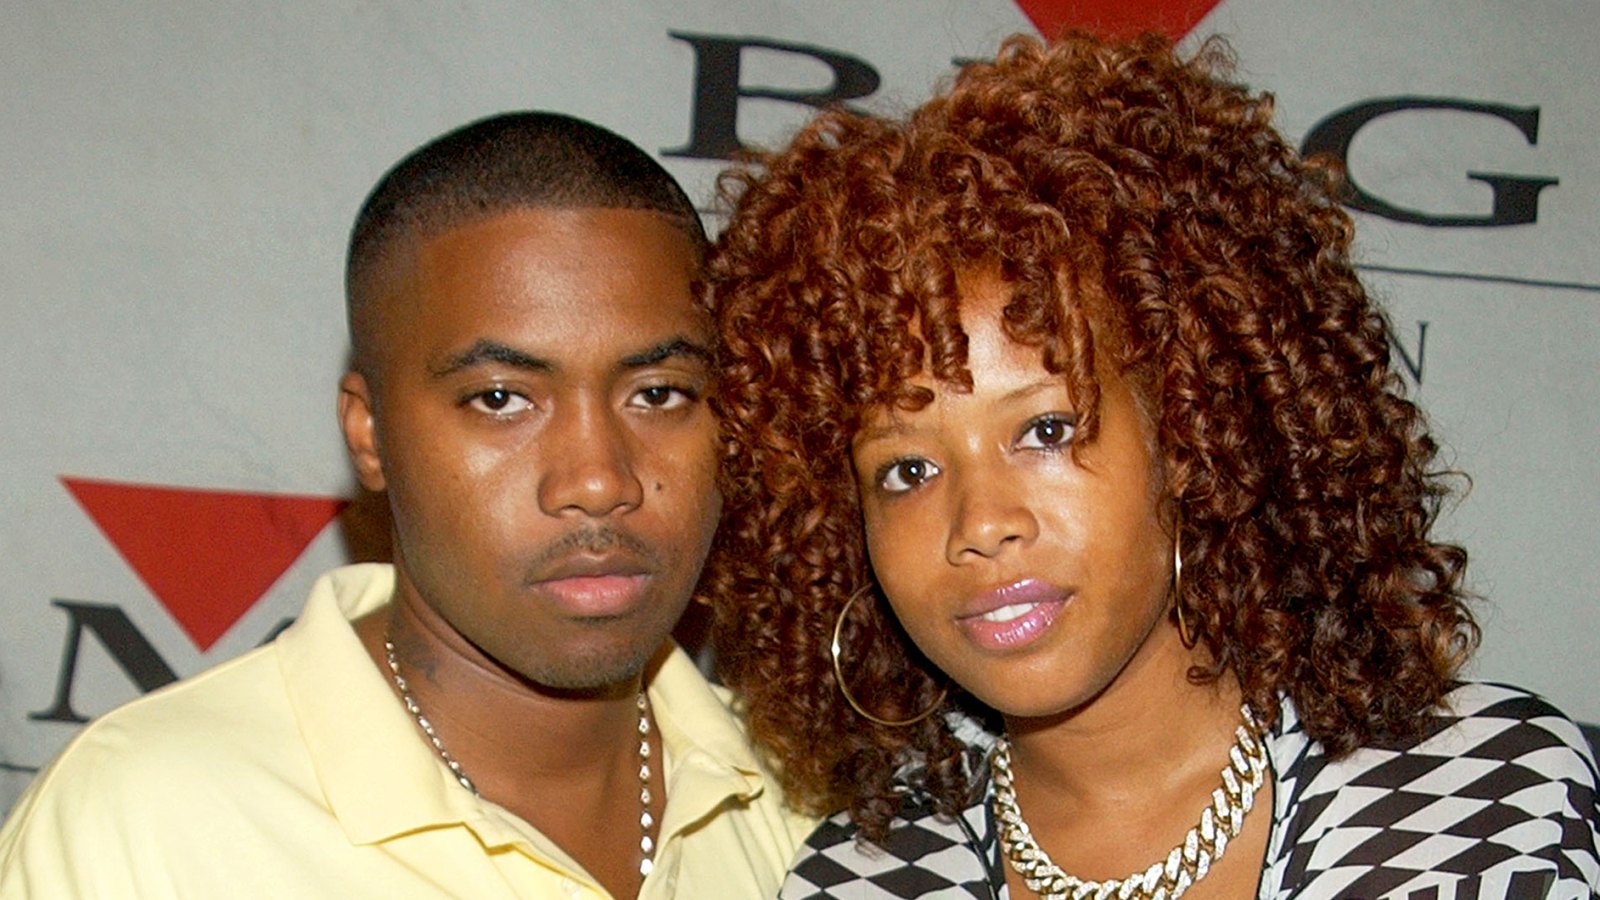 Nas and Kelis attend the "Arista Reloaded" at the 2003 BMG US Label Presentations Reception at Bryant Park Grill in New York City.